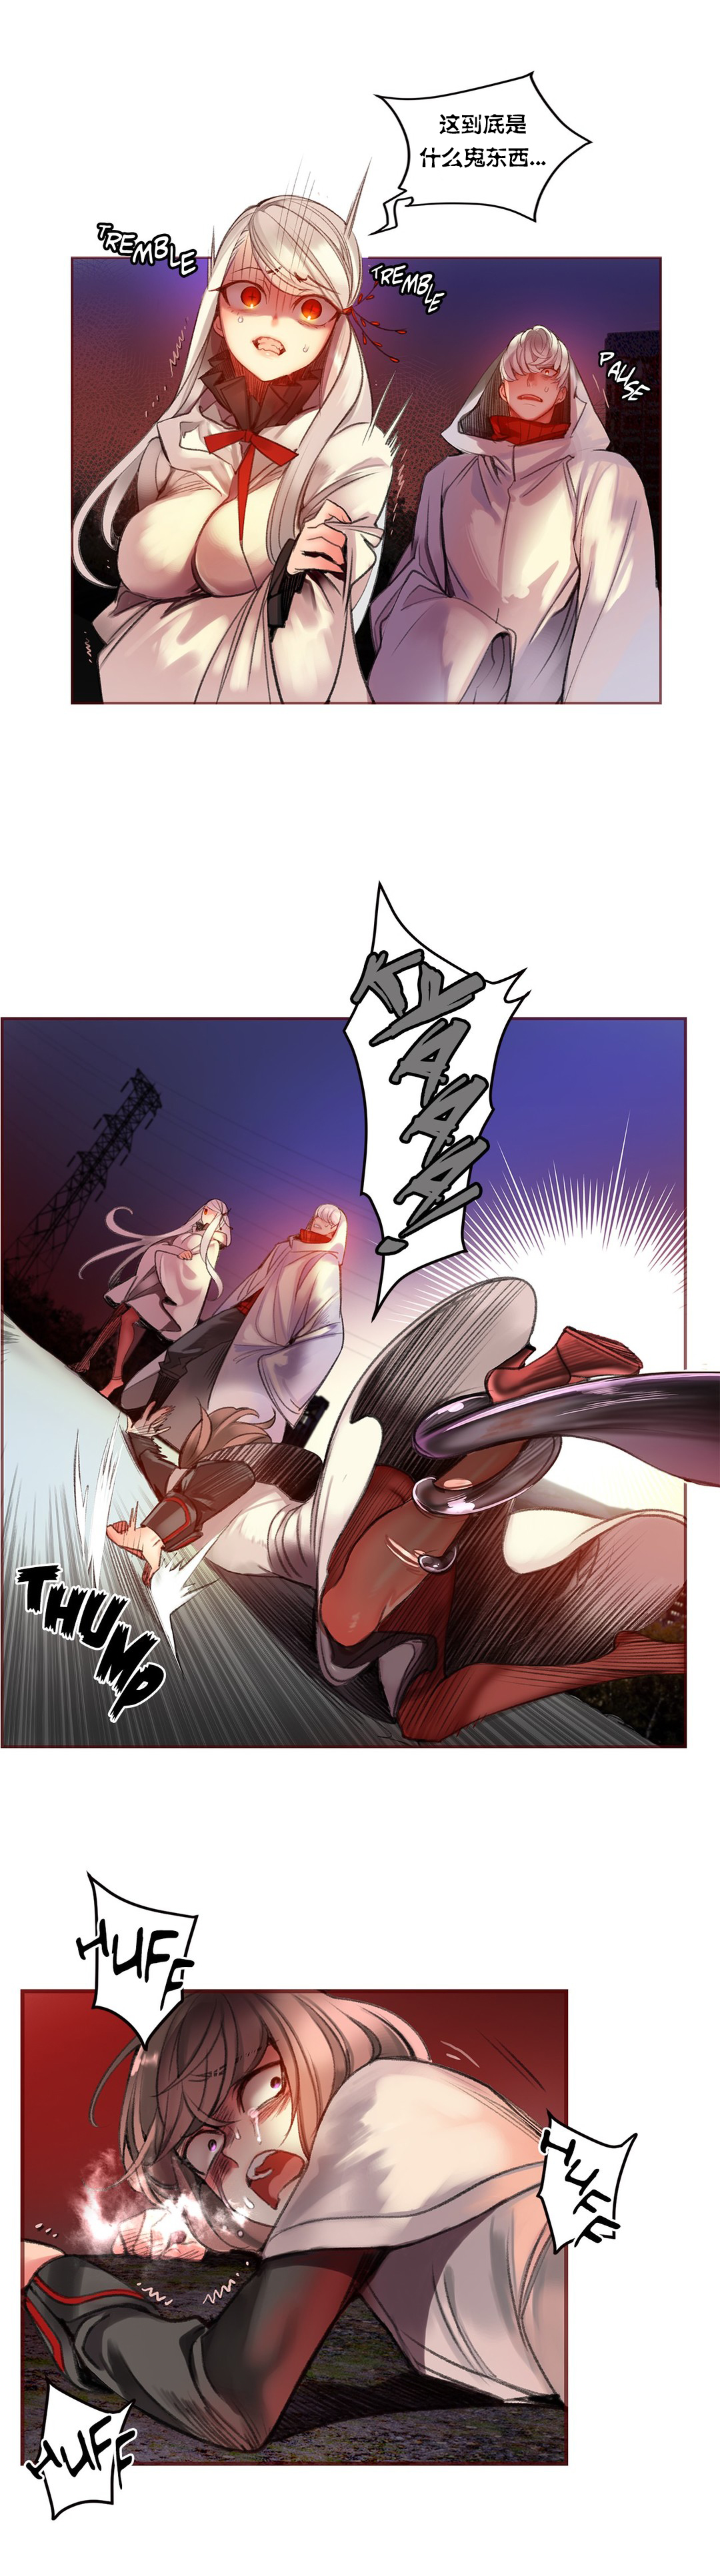 [Juder] Lilith`s Cord (第二季) Ch.61-63 [Chinese] [aaatwist个人汉化] [Ongoing] 